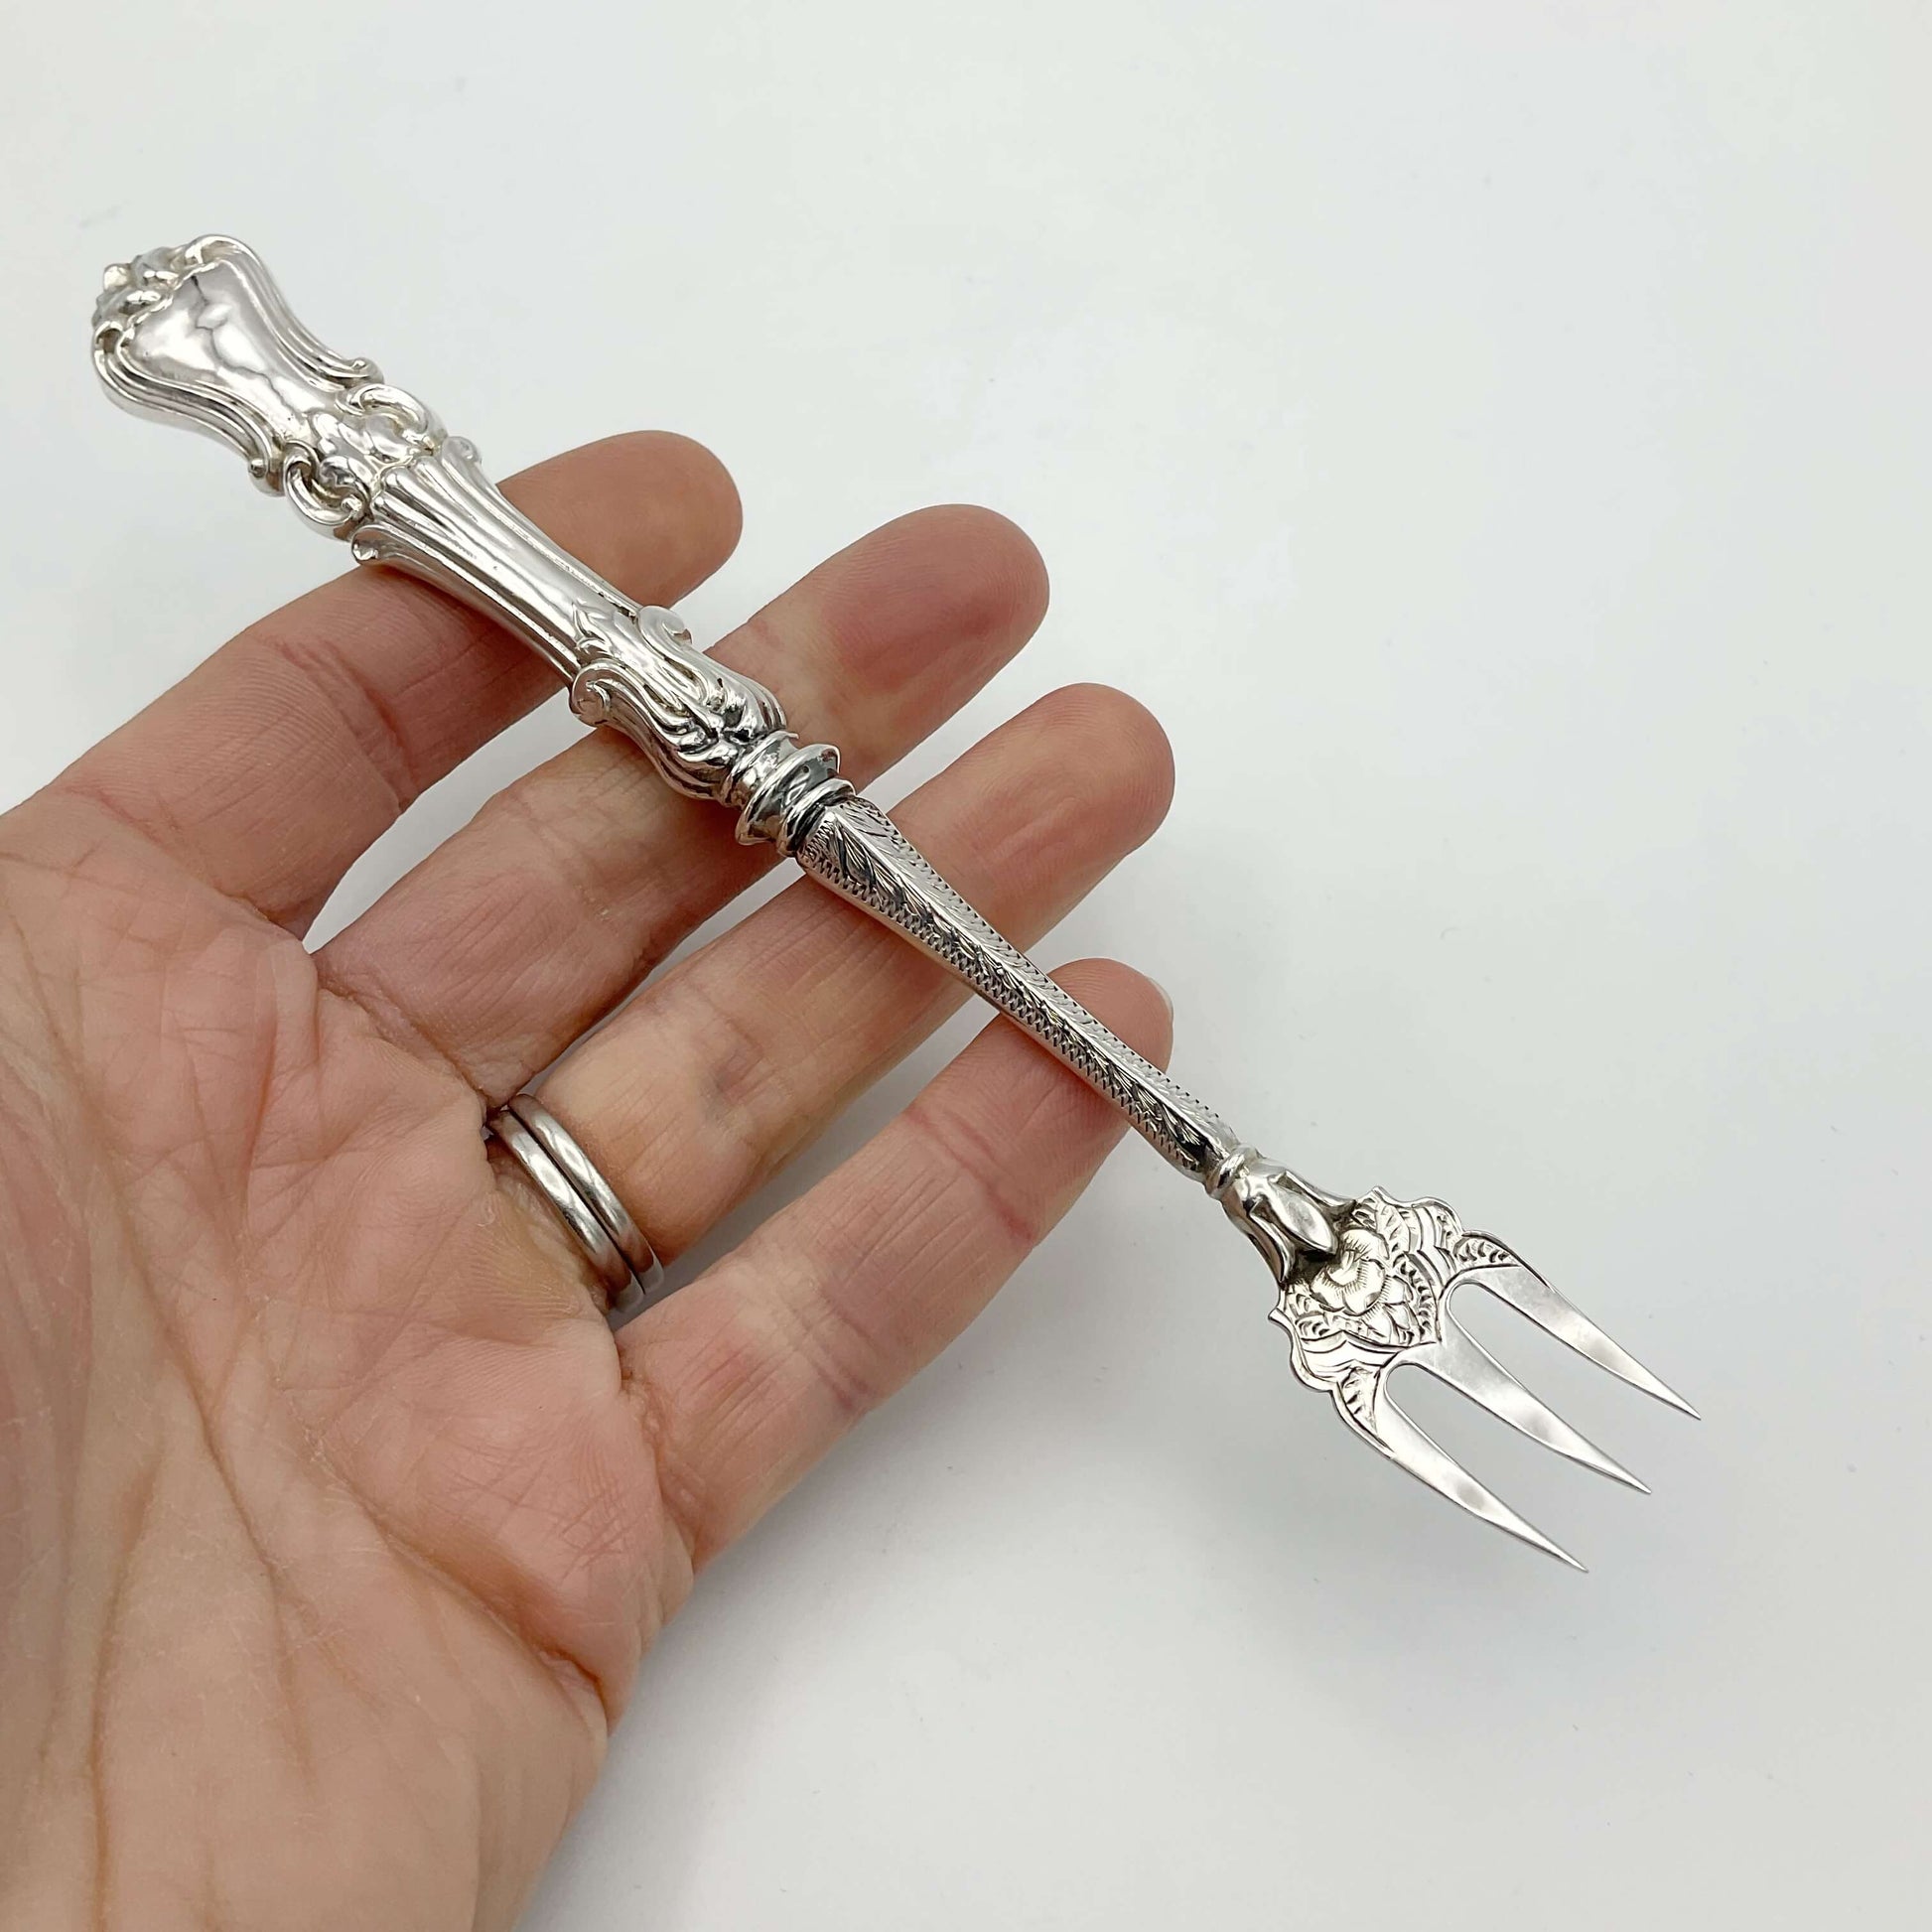 Antique Silver pickle fork held in hand